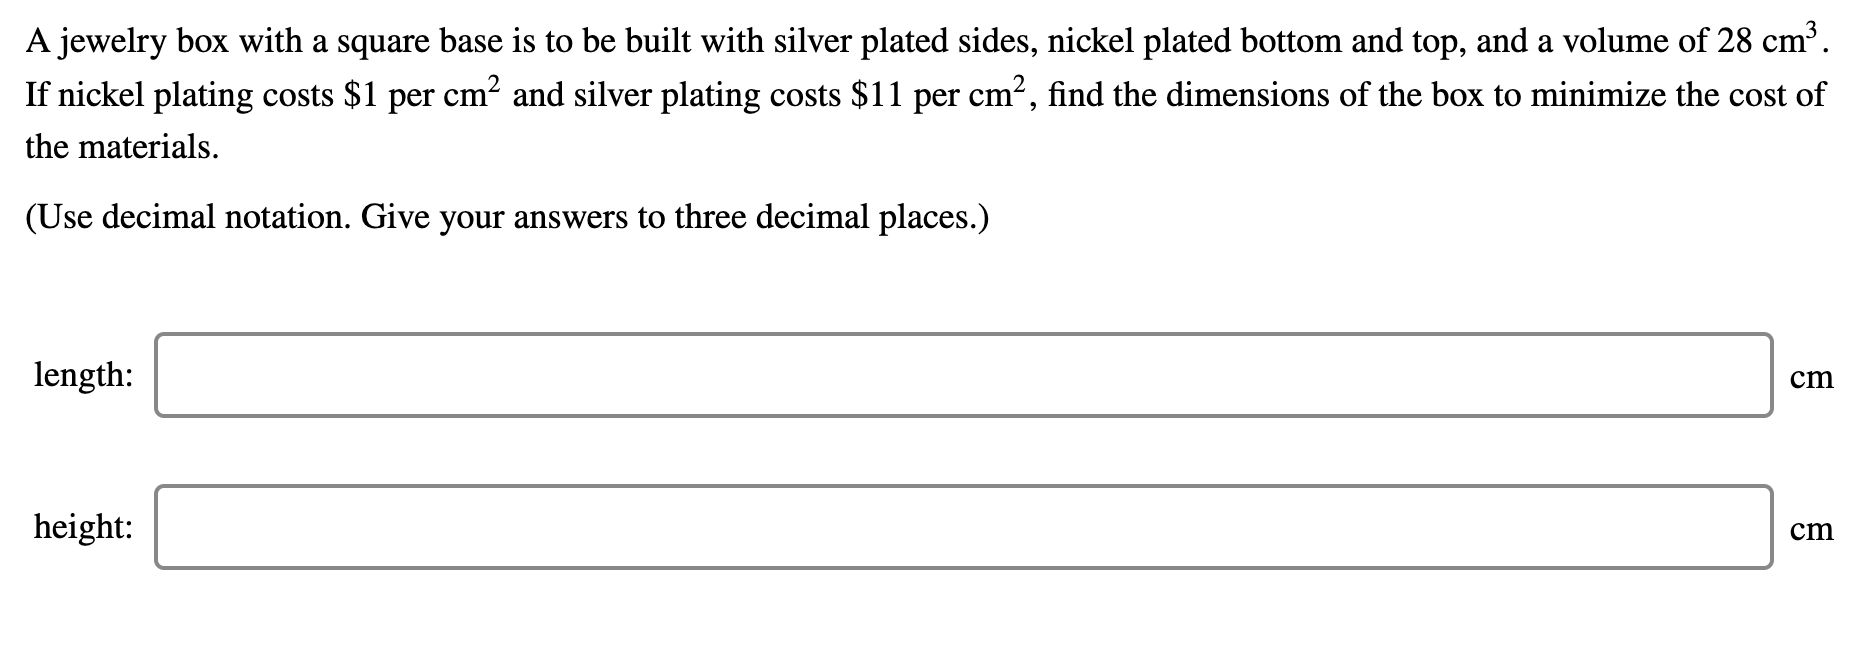 A jewelry box with a square base is to be built with silver plated sides, nickel plated bottom and top, and a volume of 28 cm³.
If nickel plating costs $1 per cm? and silver plating costs $11 per cm?, find the dimensions of the box to minimize the cost of
the materials.
